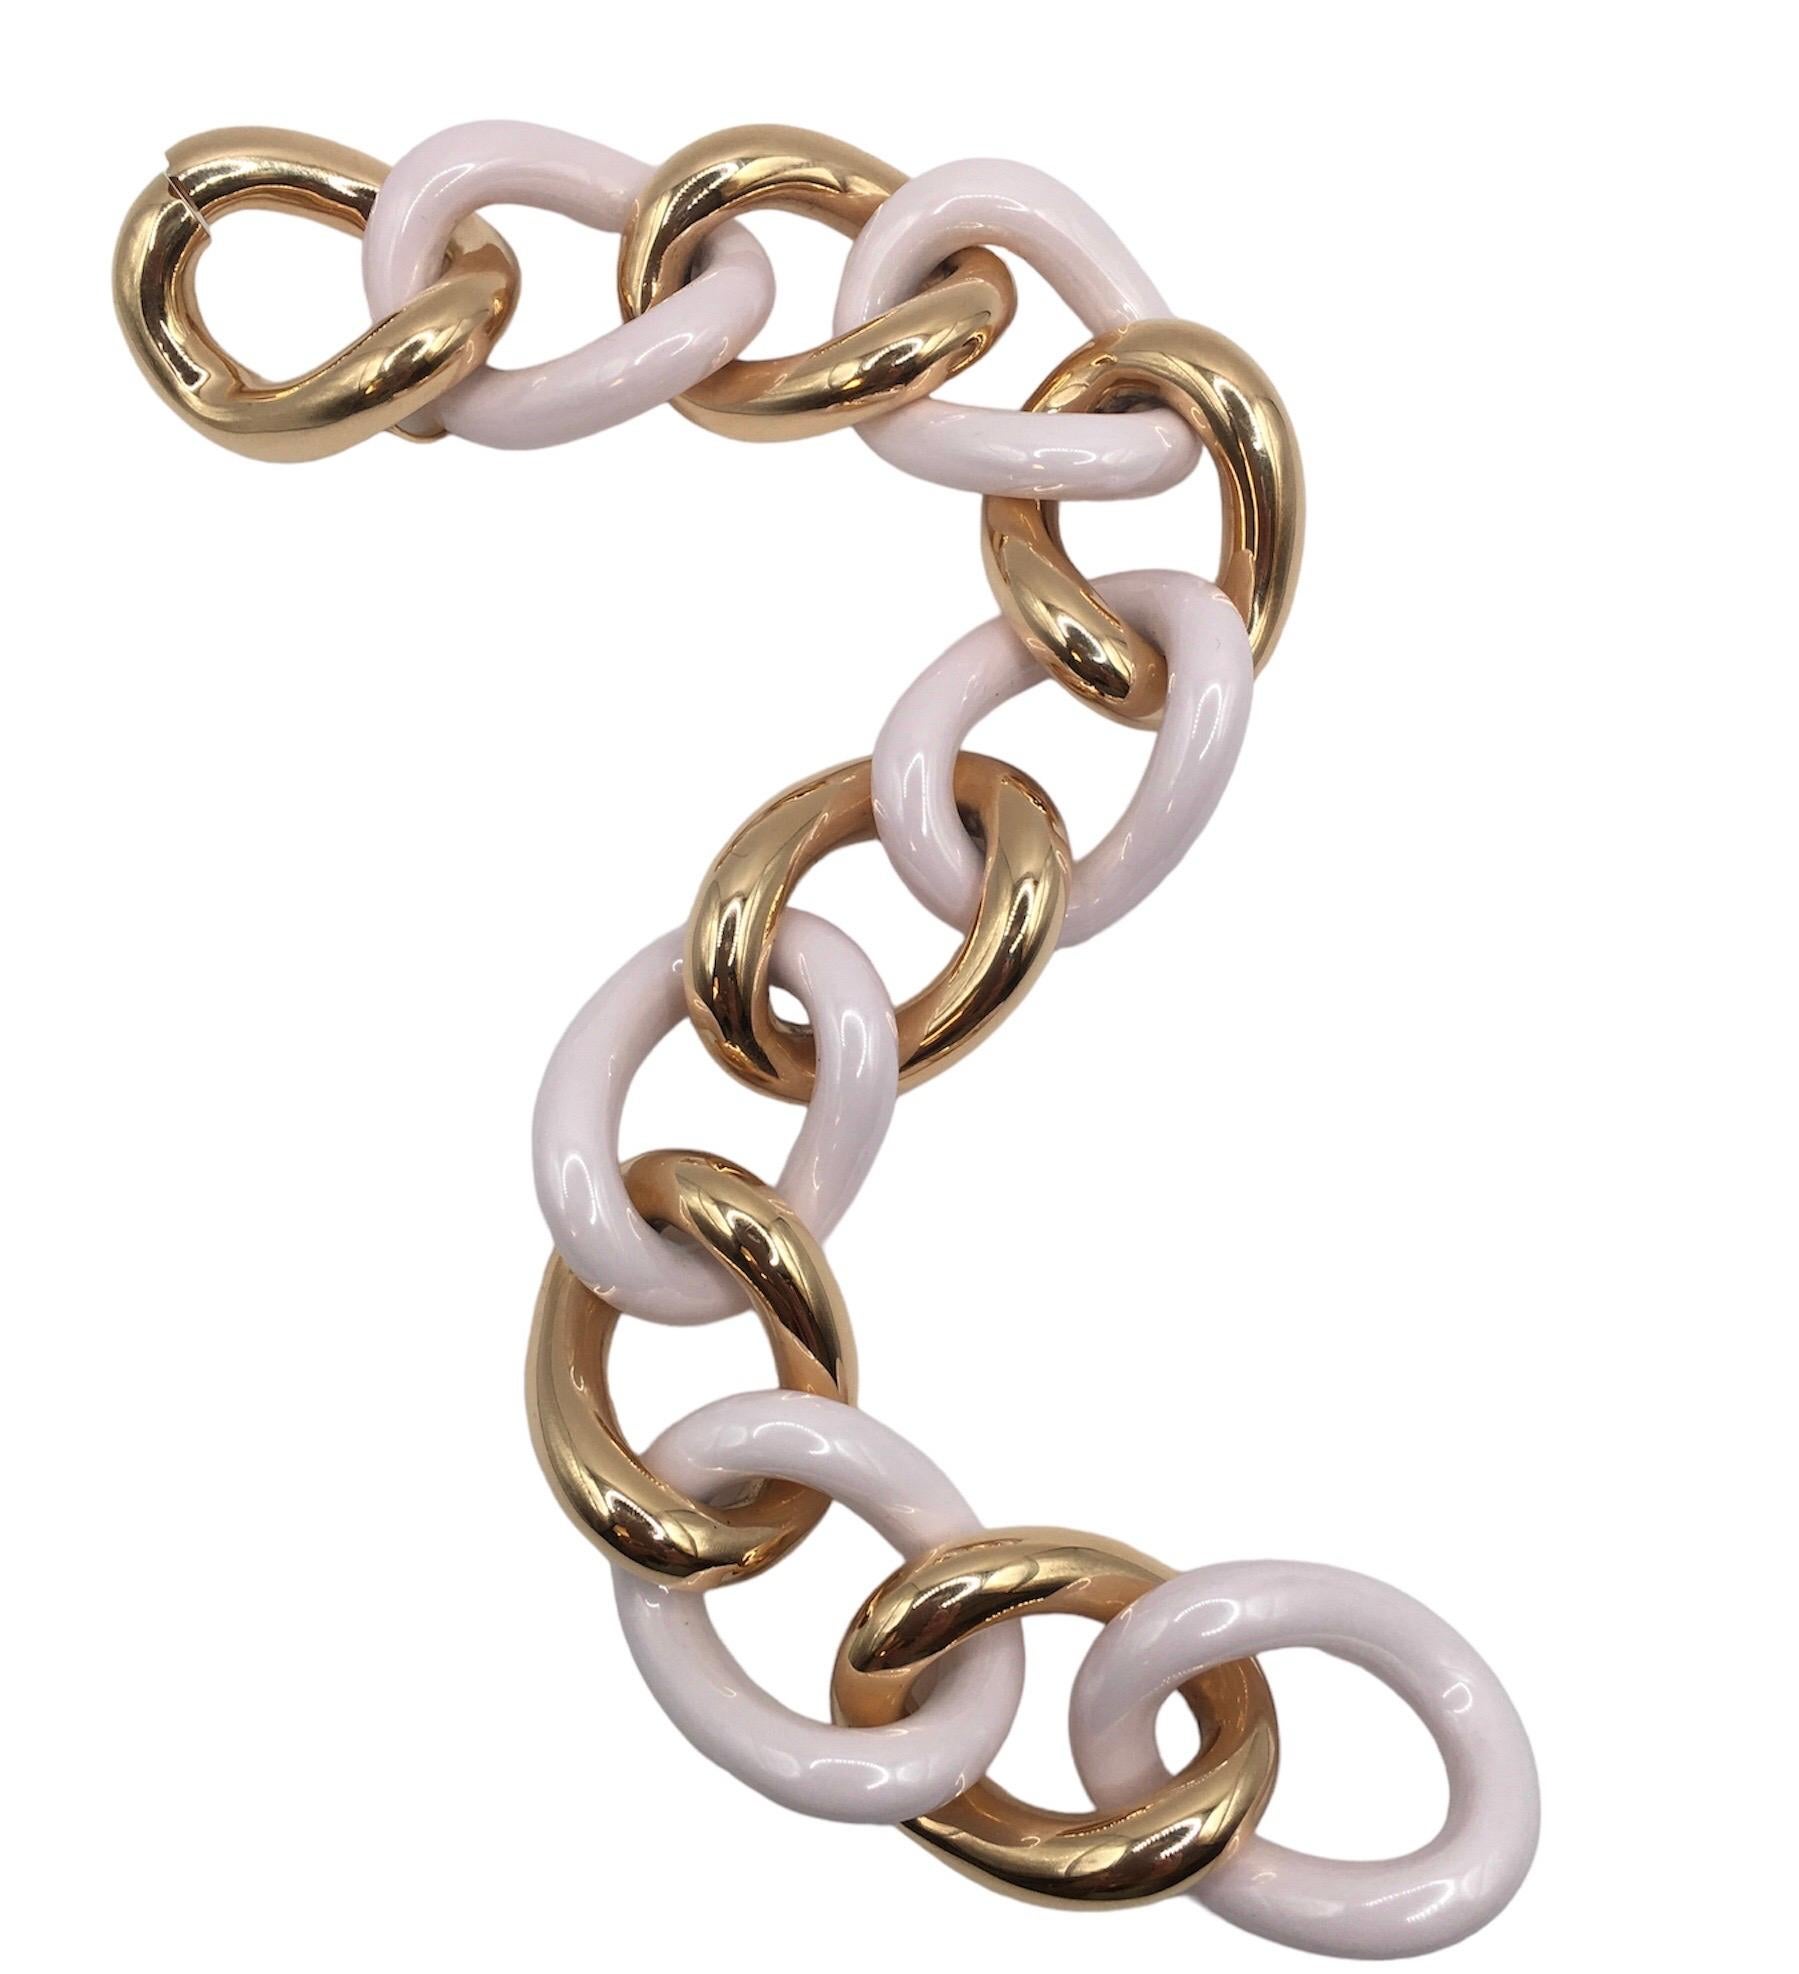 Pink ceramic groumette bracelet in 18 kt rose gold
The ceramic is a very resistant material. 
This iconic collection in Micheletto tradition was originally made only in gold just more or less 10 years ago it became very popular the ceramic